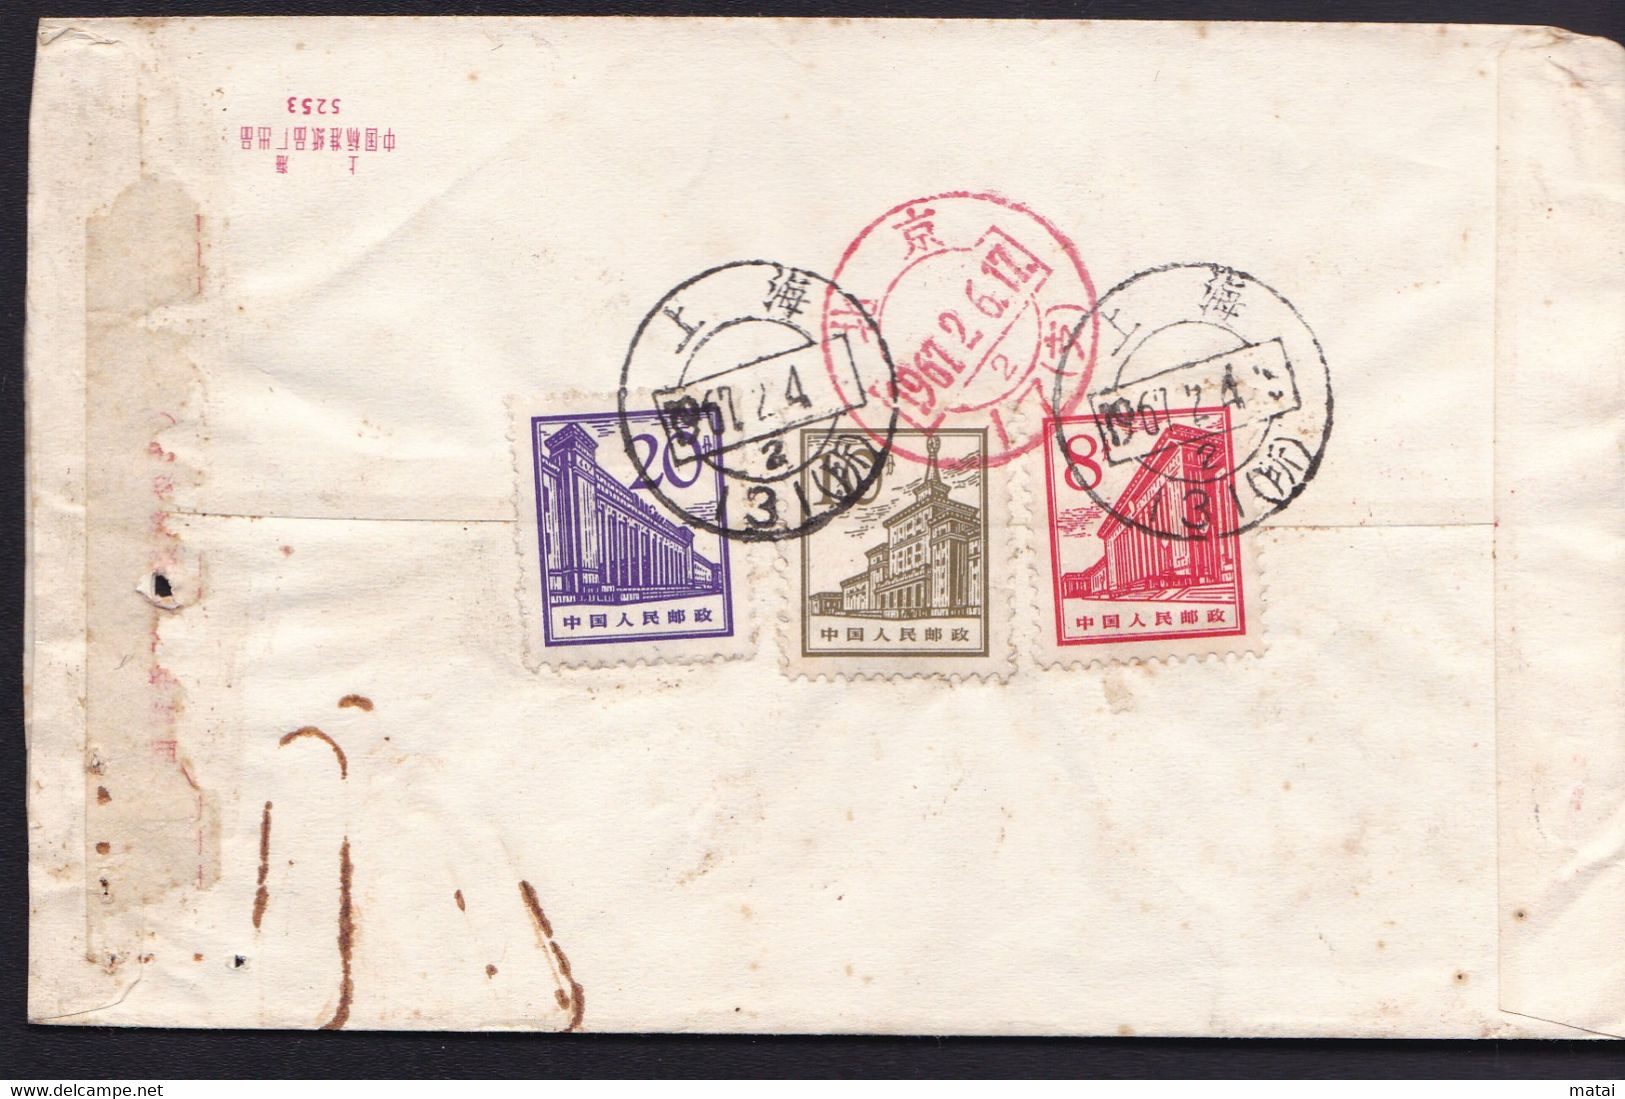 CHINA  CHINE 1967 SHANGHAI TO  Beijing State Council 北京 国务院 COVER 挂号 回执 Receipt Of Registration 0.08f +0.10f+0.20f  RARE - Storia Postale